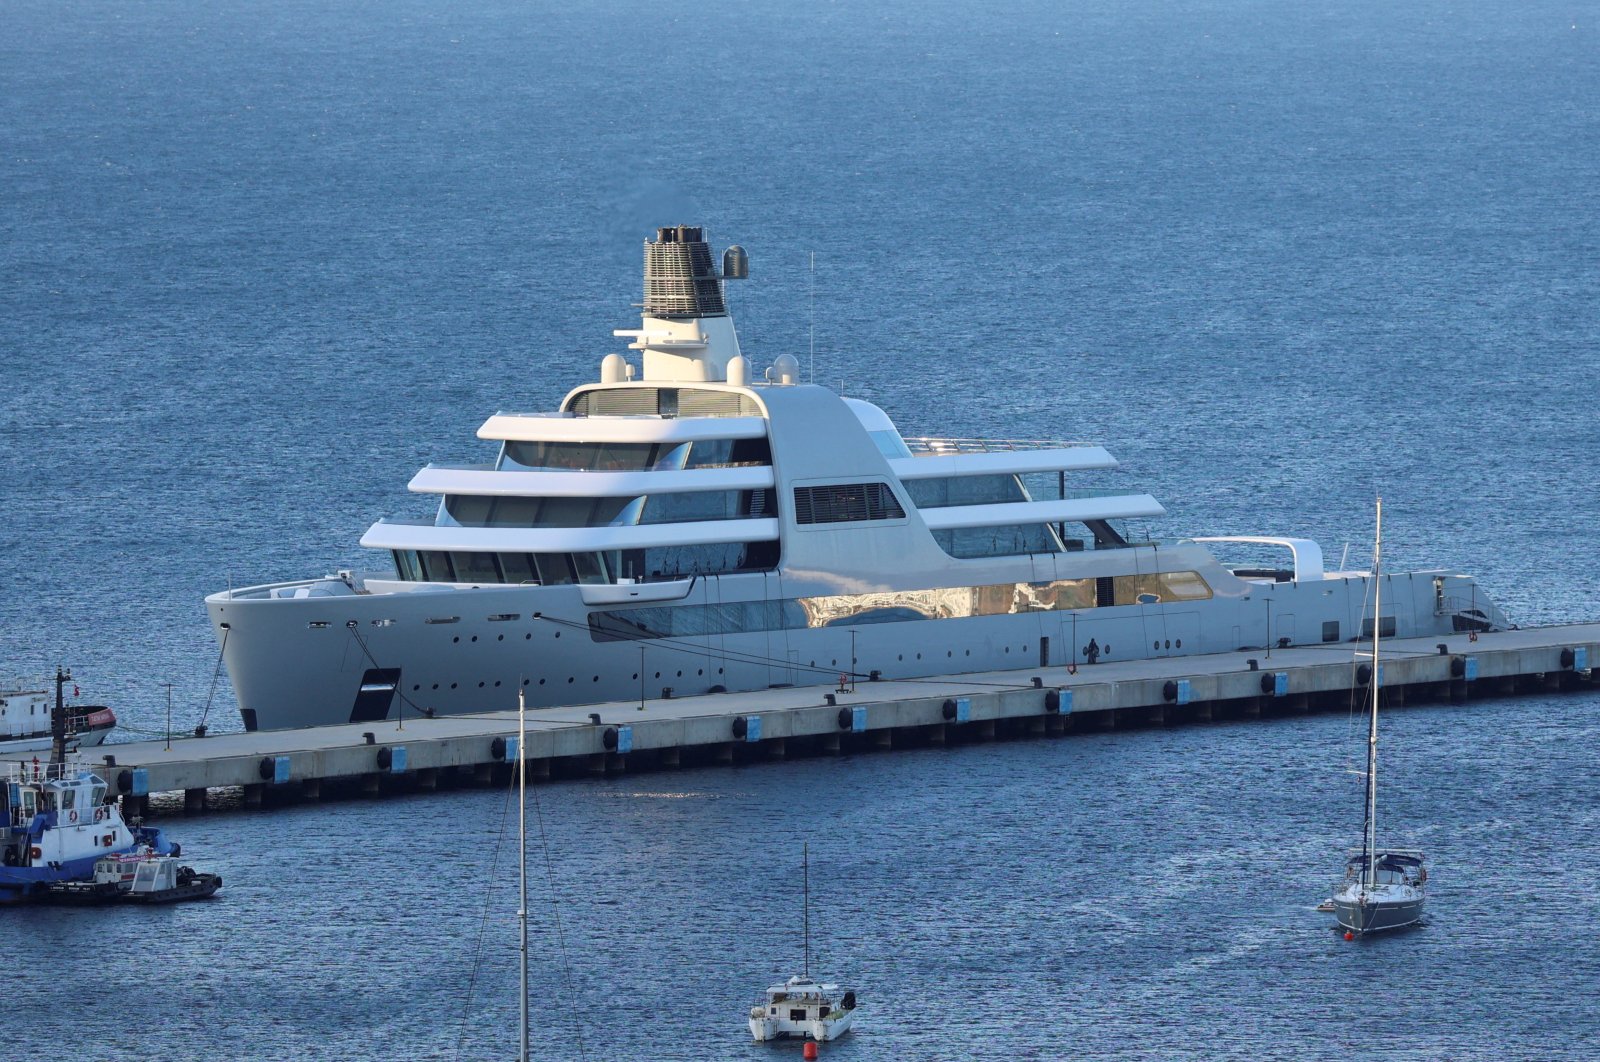 Solaris, a superyacht linked to sanctioned Russian oligarch Roman Abramovich, is pictured in Bodrum, southwest Turkey, March 22, 2022. (Reuters Photo)